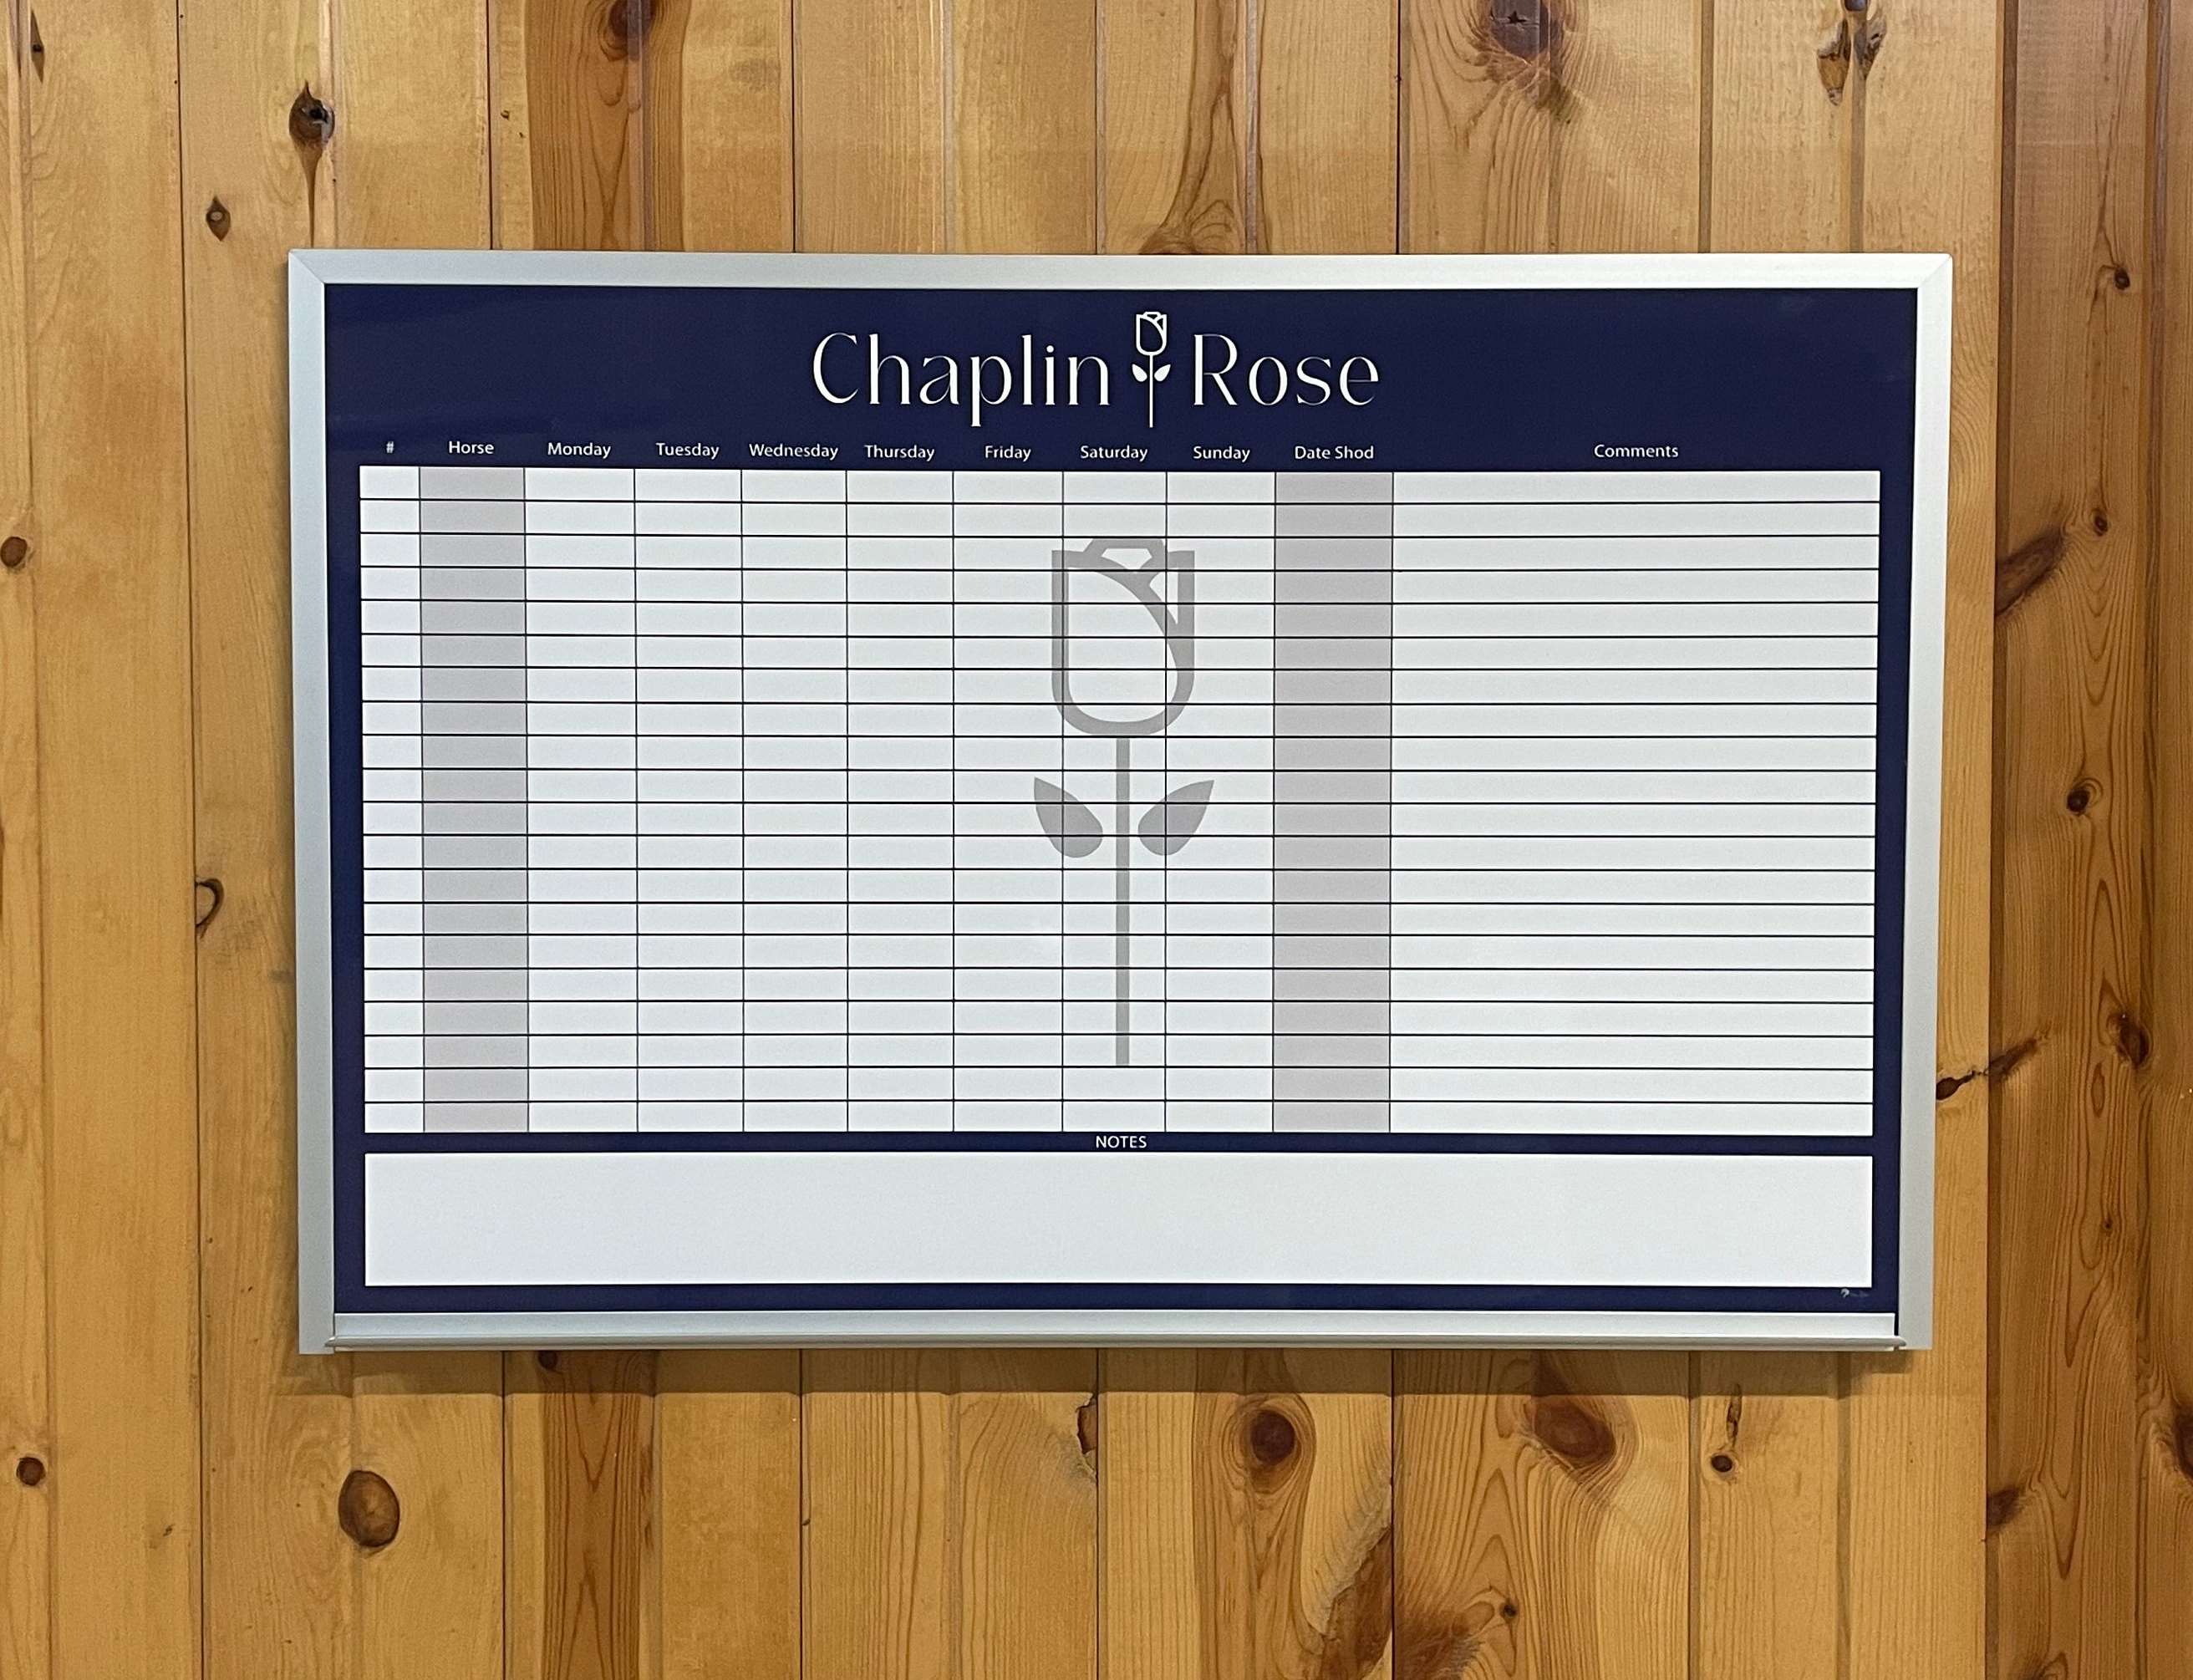 Magnetic Custom Printed Dry-Erase Boards for Equestrians, Horse Farms, Horse Trainers, Show Barns